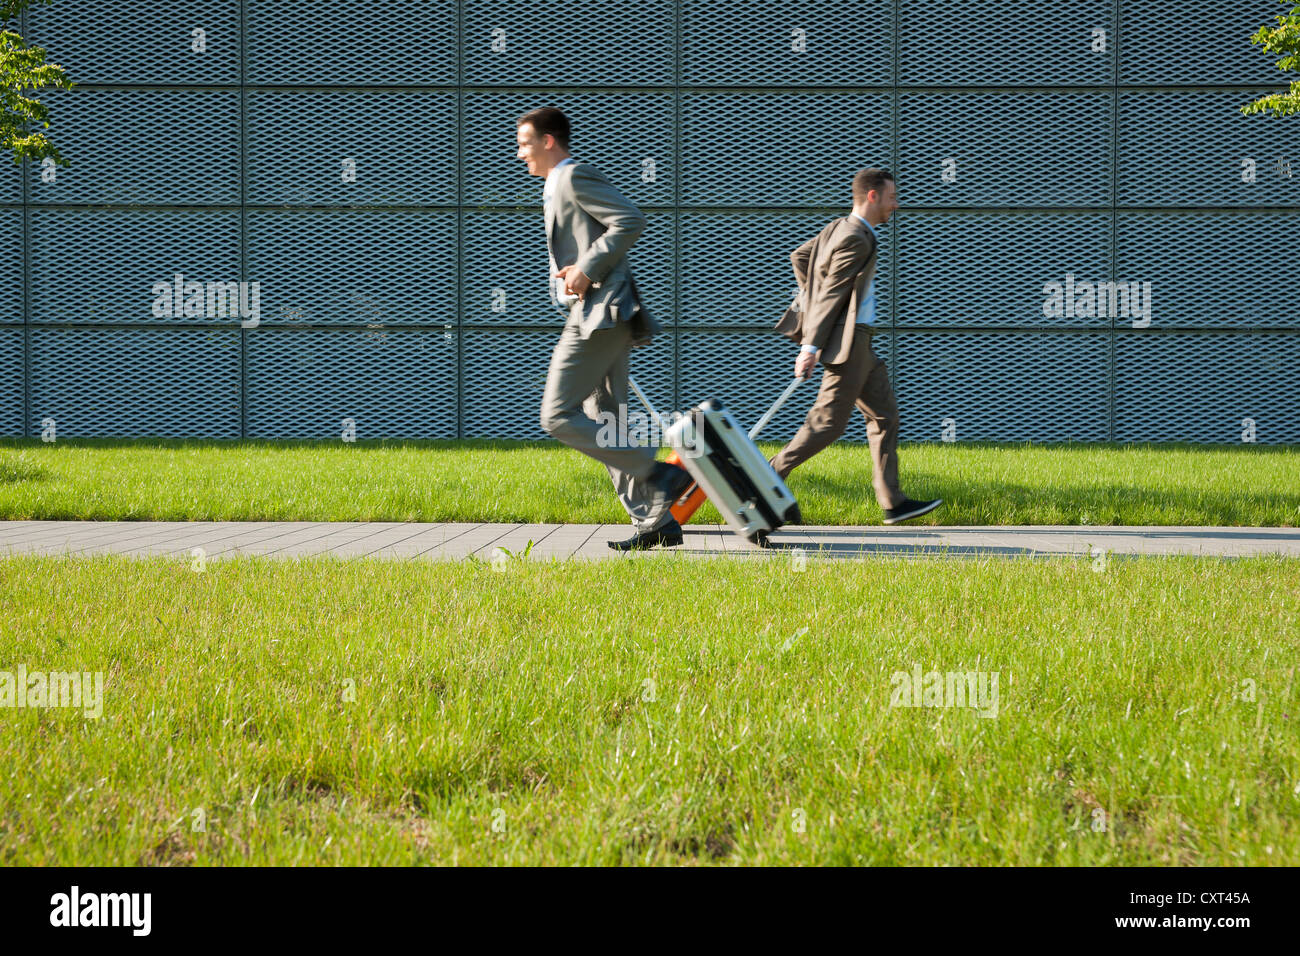 Two businessmen hurrying to an appointment Stock Photo